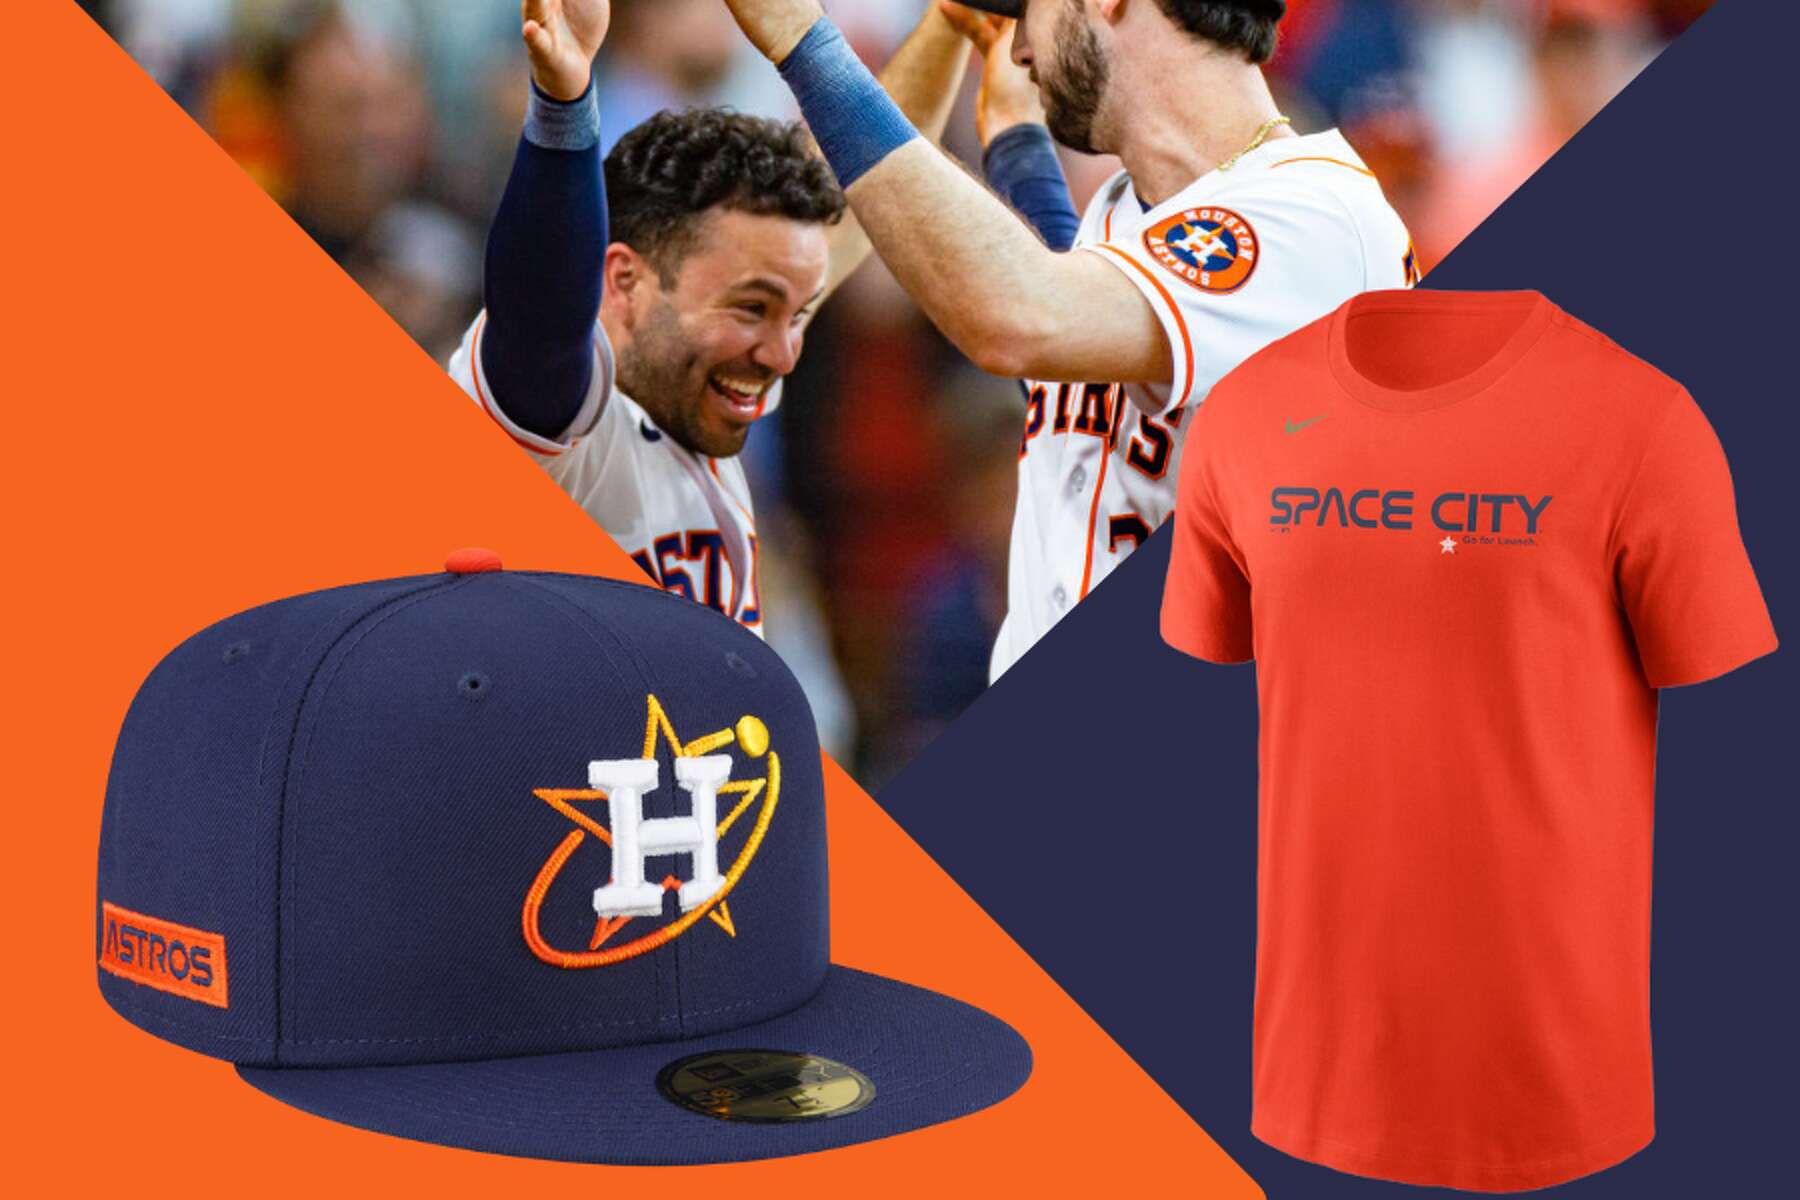 new astros jersey space city